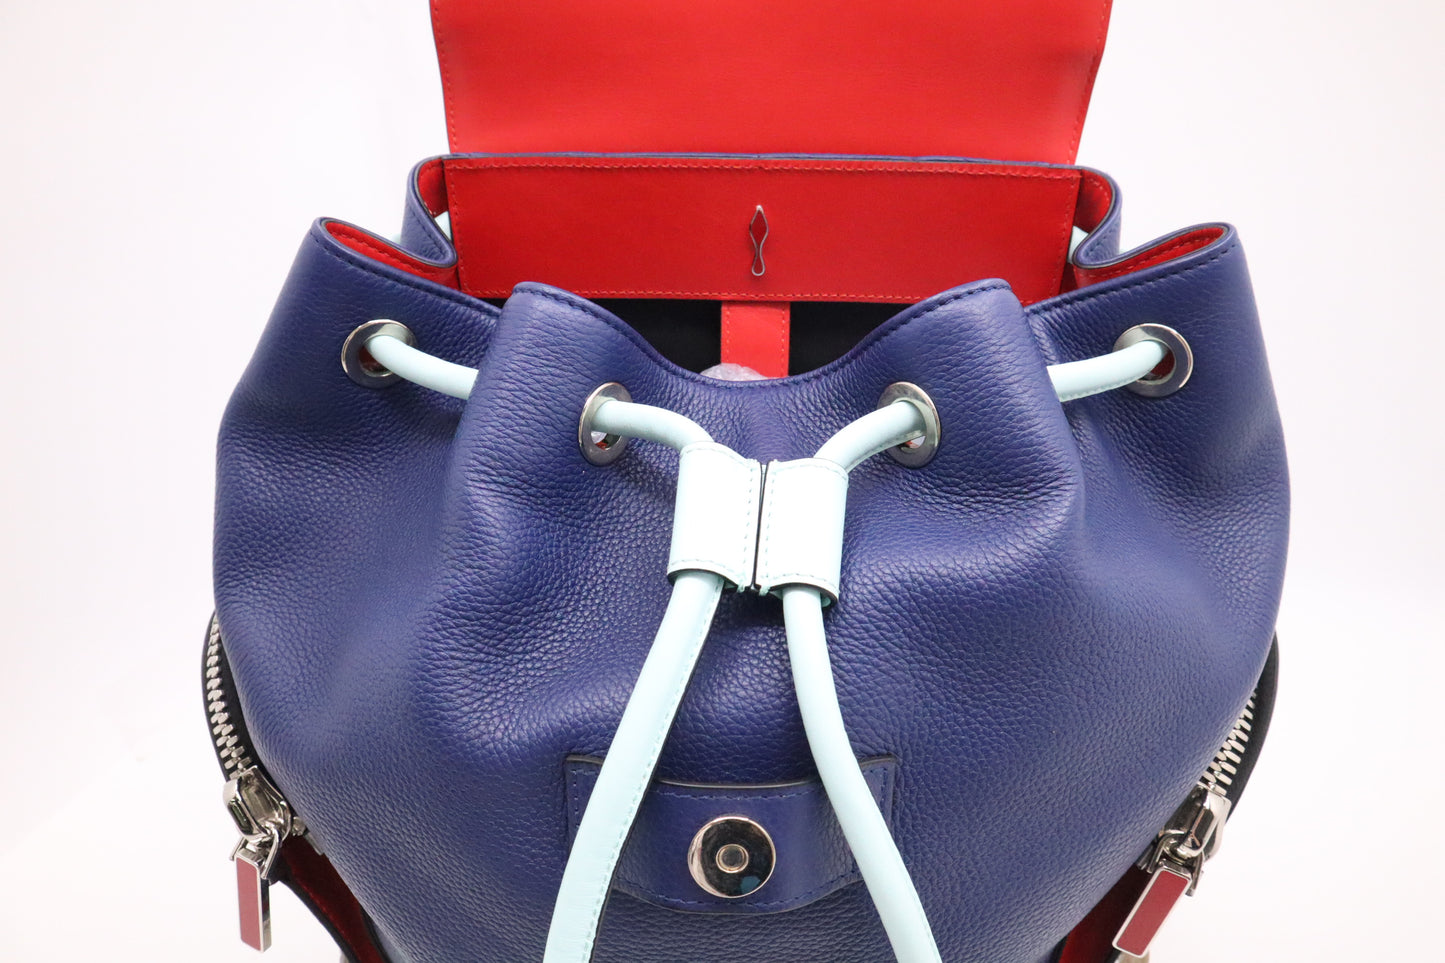 Louboutin Backpack in Blue Leather